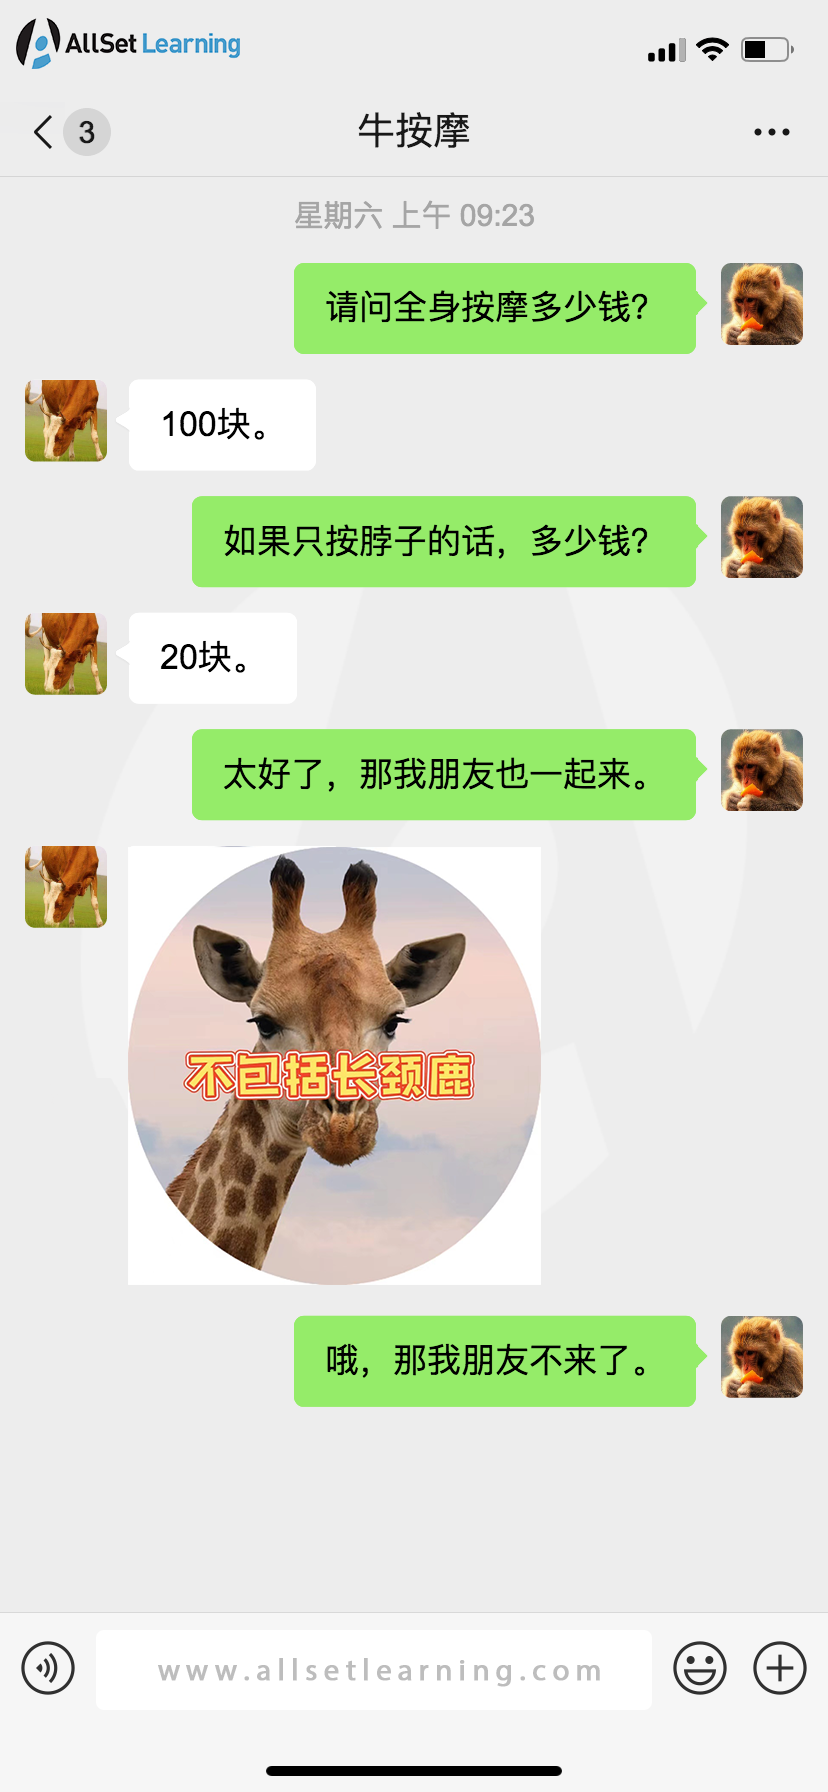 Animals Use WeChat 10 — AllSet Learning